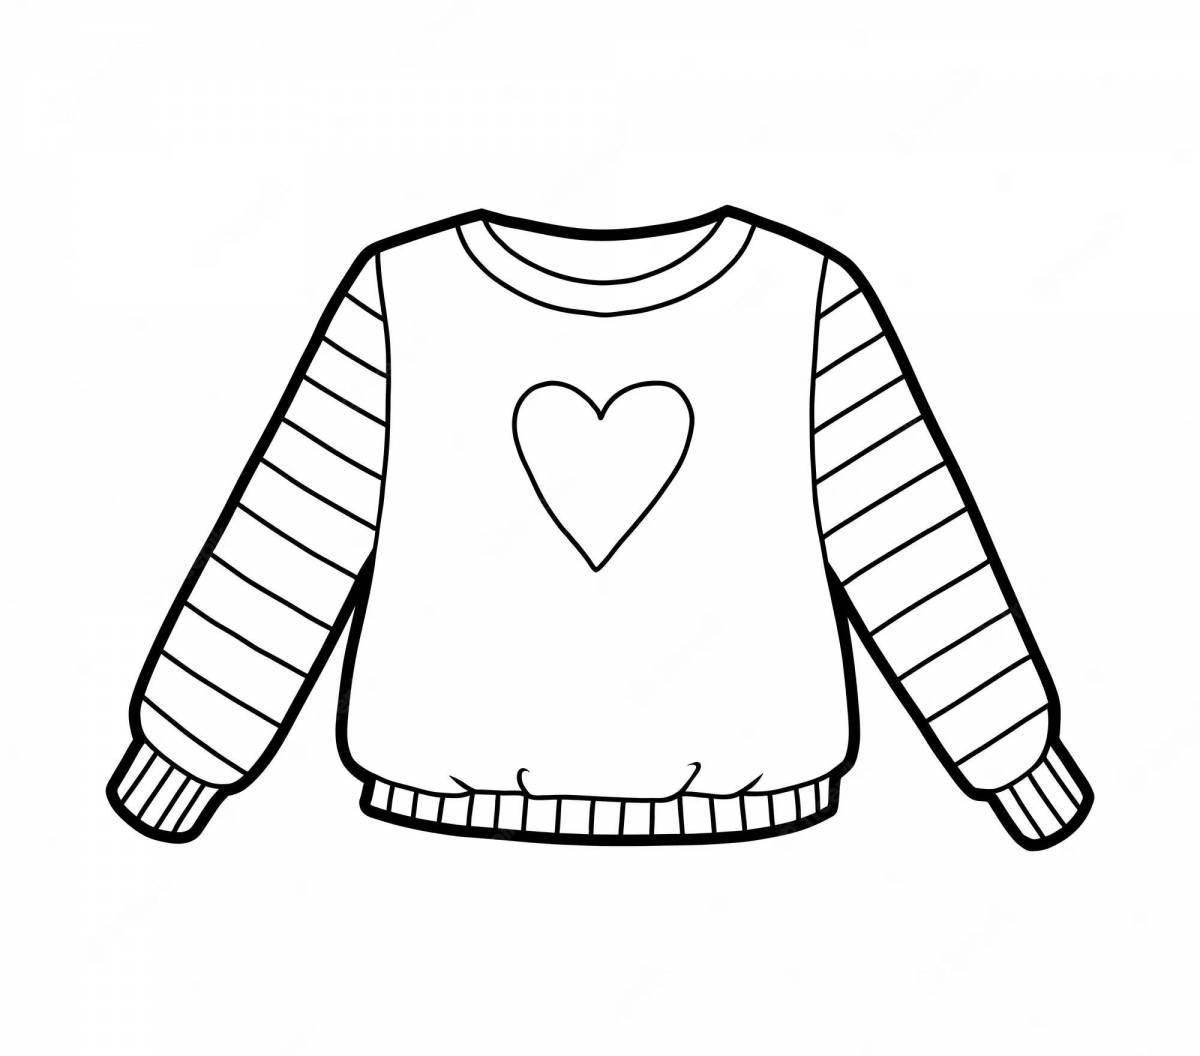 Radiant sweater coloring book for preschoolers